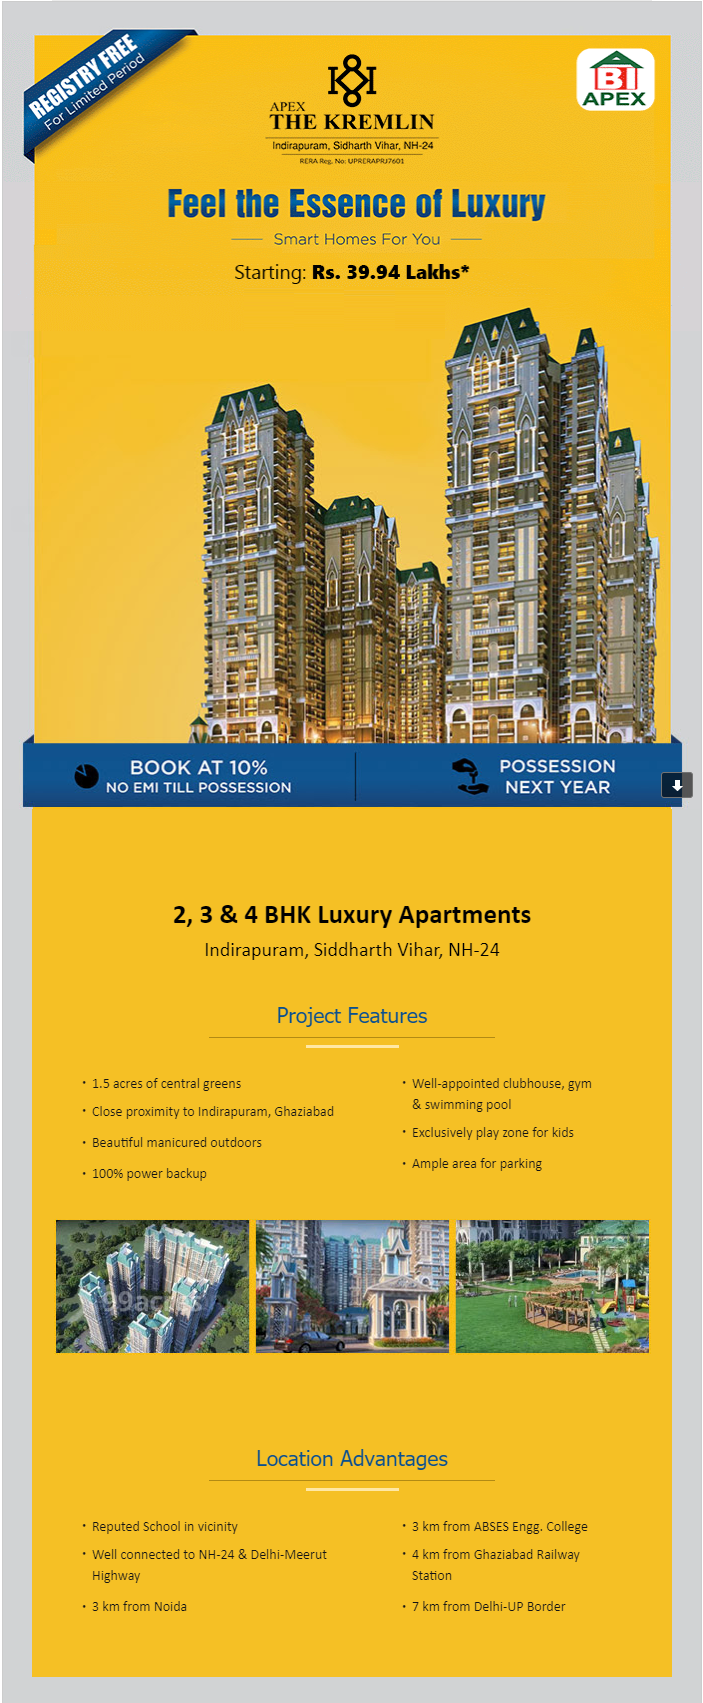 Book at 10% & no EMI till possession at Apex The Kremlin in Ghaziabad